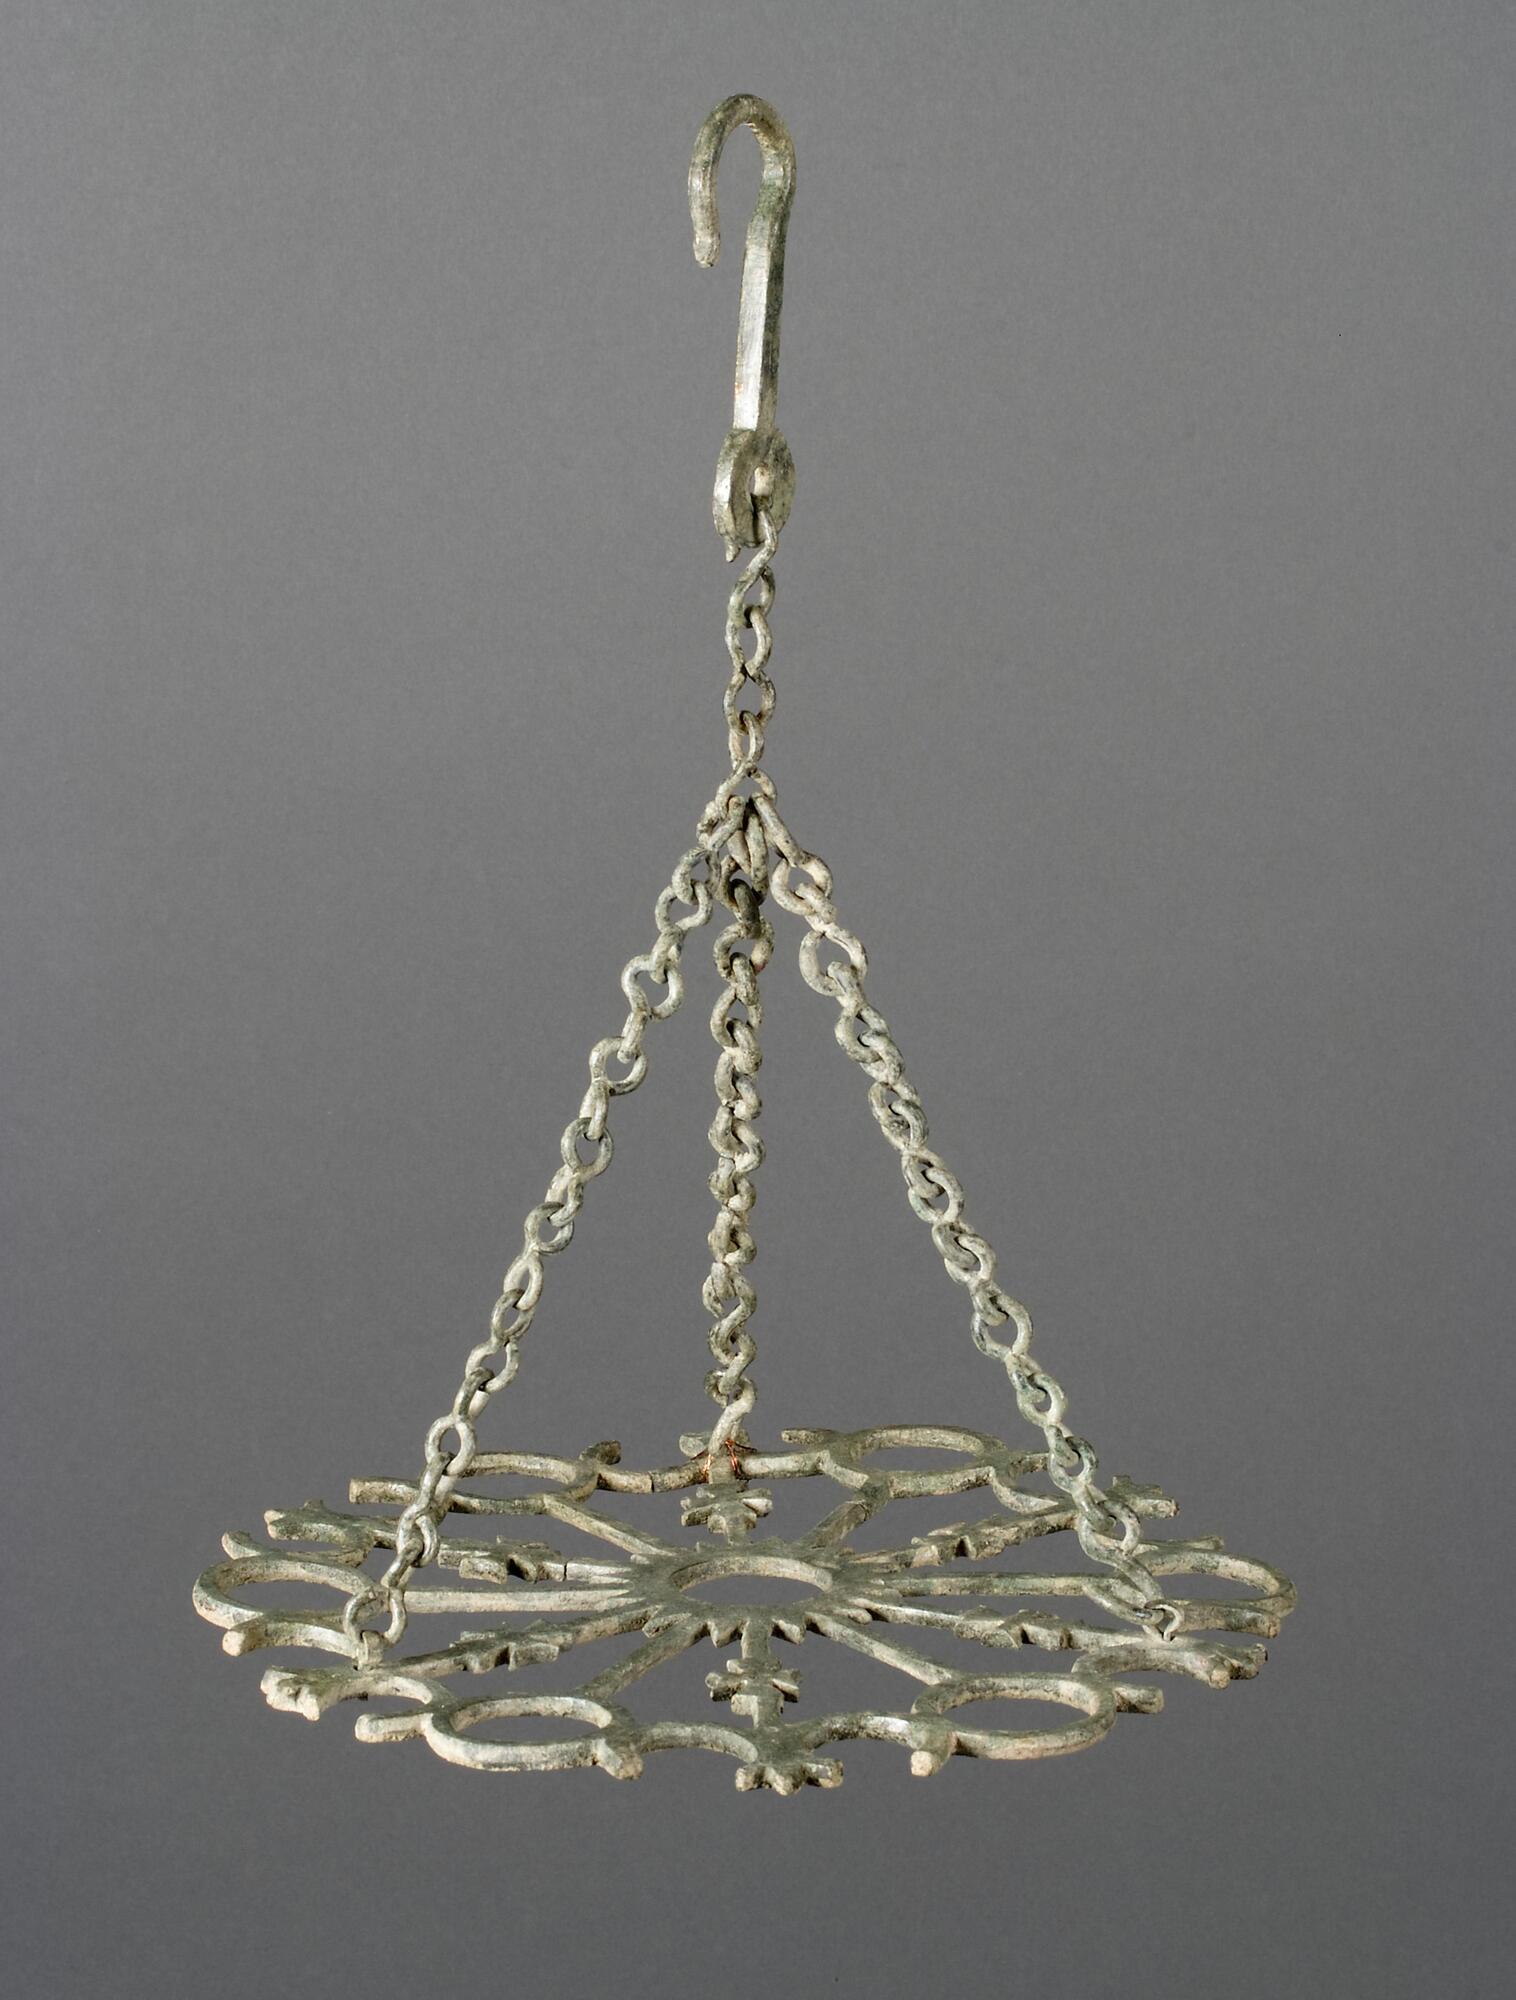 This bronze light fixture consists of a central circular celestial motif from which extend twelve arms in a radial pattern. Six of these arms, embellished with maltese crosses, end in omega-shaped terminals. These decorated arms alternate with six unadorned arms that terminate in rings designed to hold glass oil lamps. The entire disk is suspended from three bronze chains joined to a large hook.